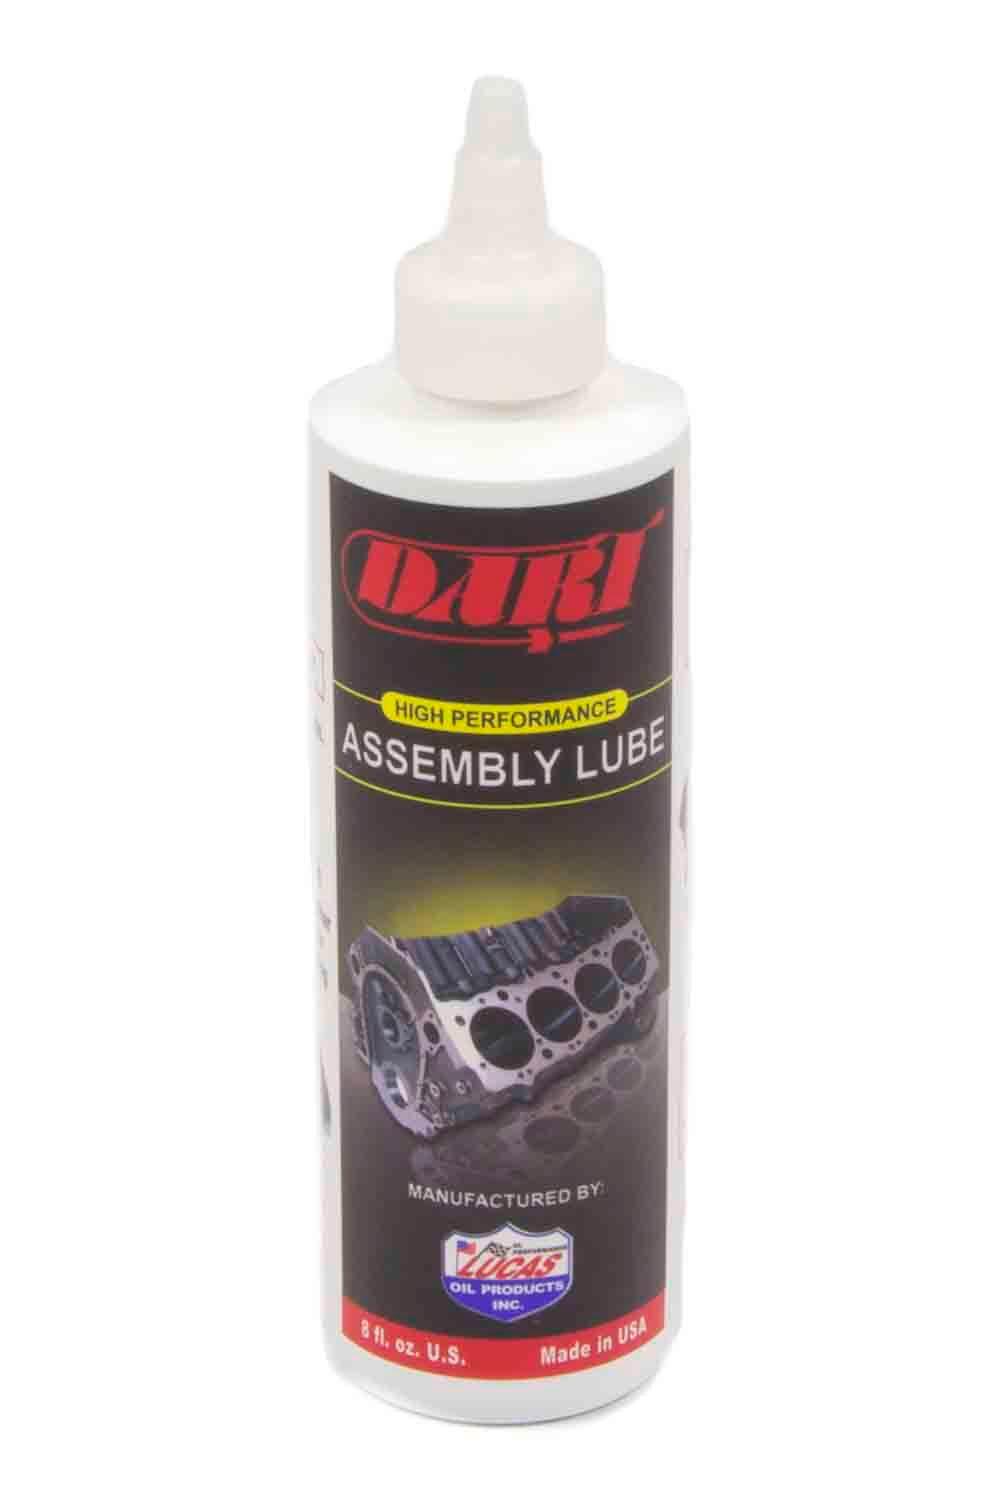 High Perf. Assembly Lube - 8oz. - Burlile Performance Products